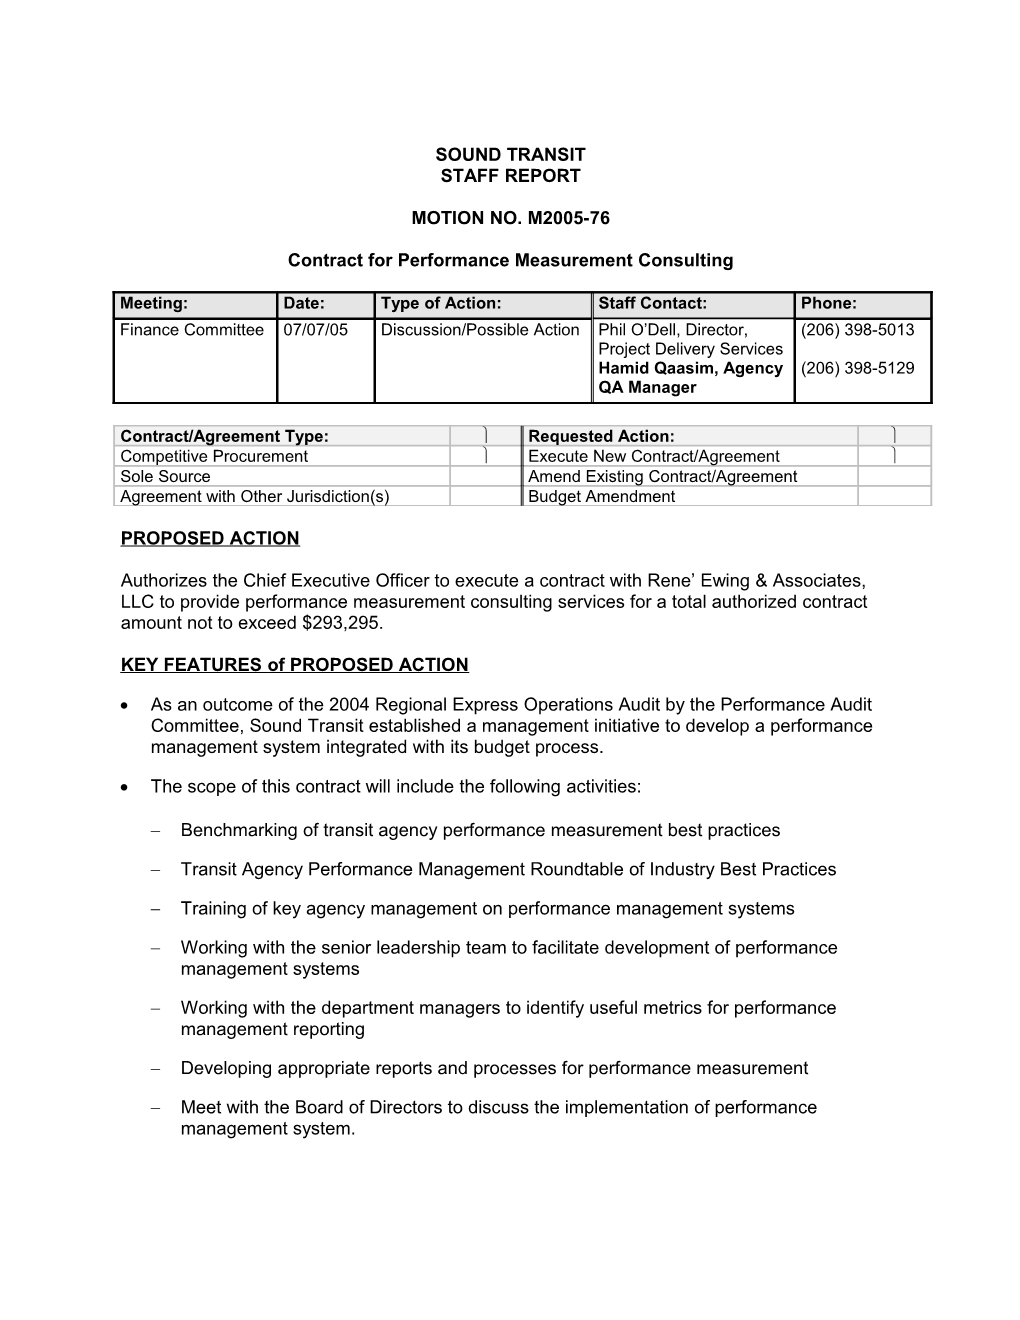 Contract for Performance Measurement Consulting